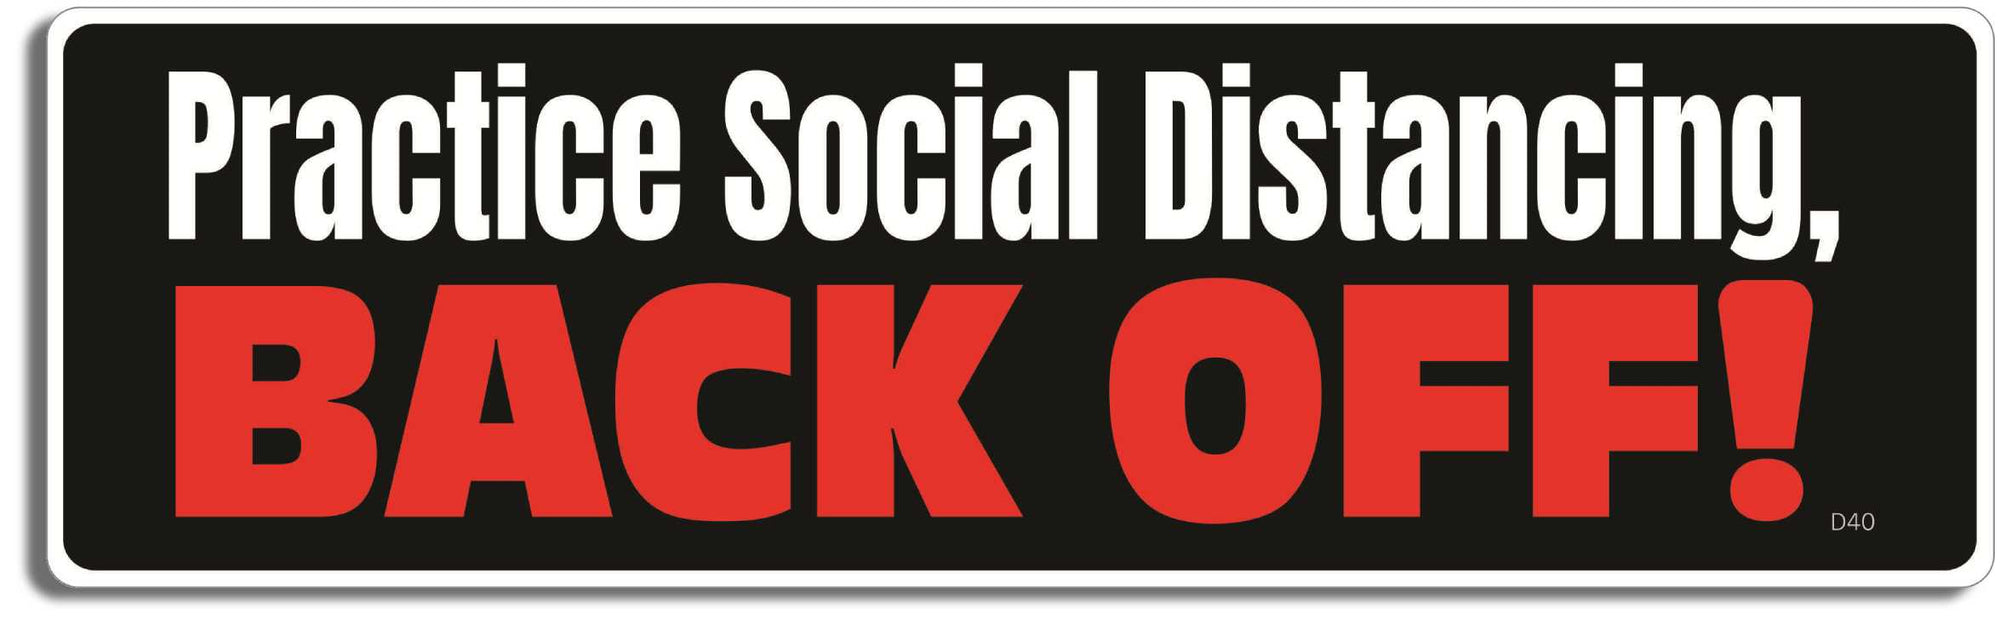 Practice Social Distancing - Back off!-  3" x 10" Bumper Sticker--Car Magnet- -  Decal Bumper Sticker-funny Bumper Sticker Car Magnet Practice Social Distancing-  Decal for carscorona virus, covid-19, drive safely, Driving, Funny, safe driving, tailgaters, tailgating